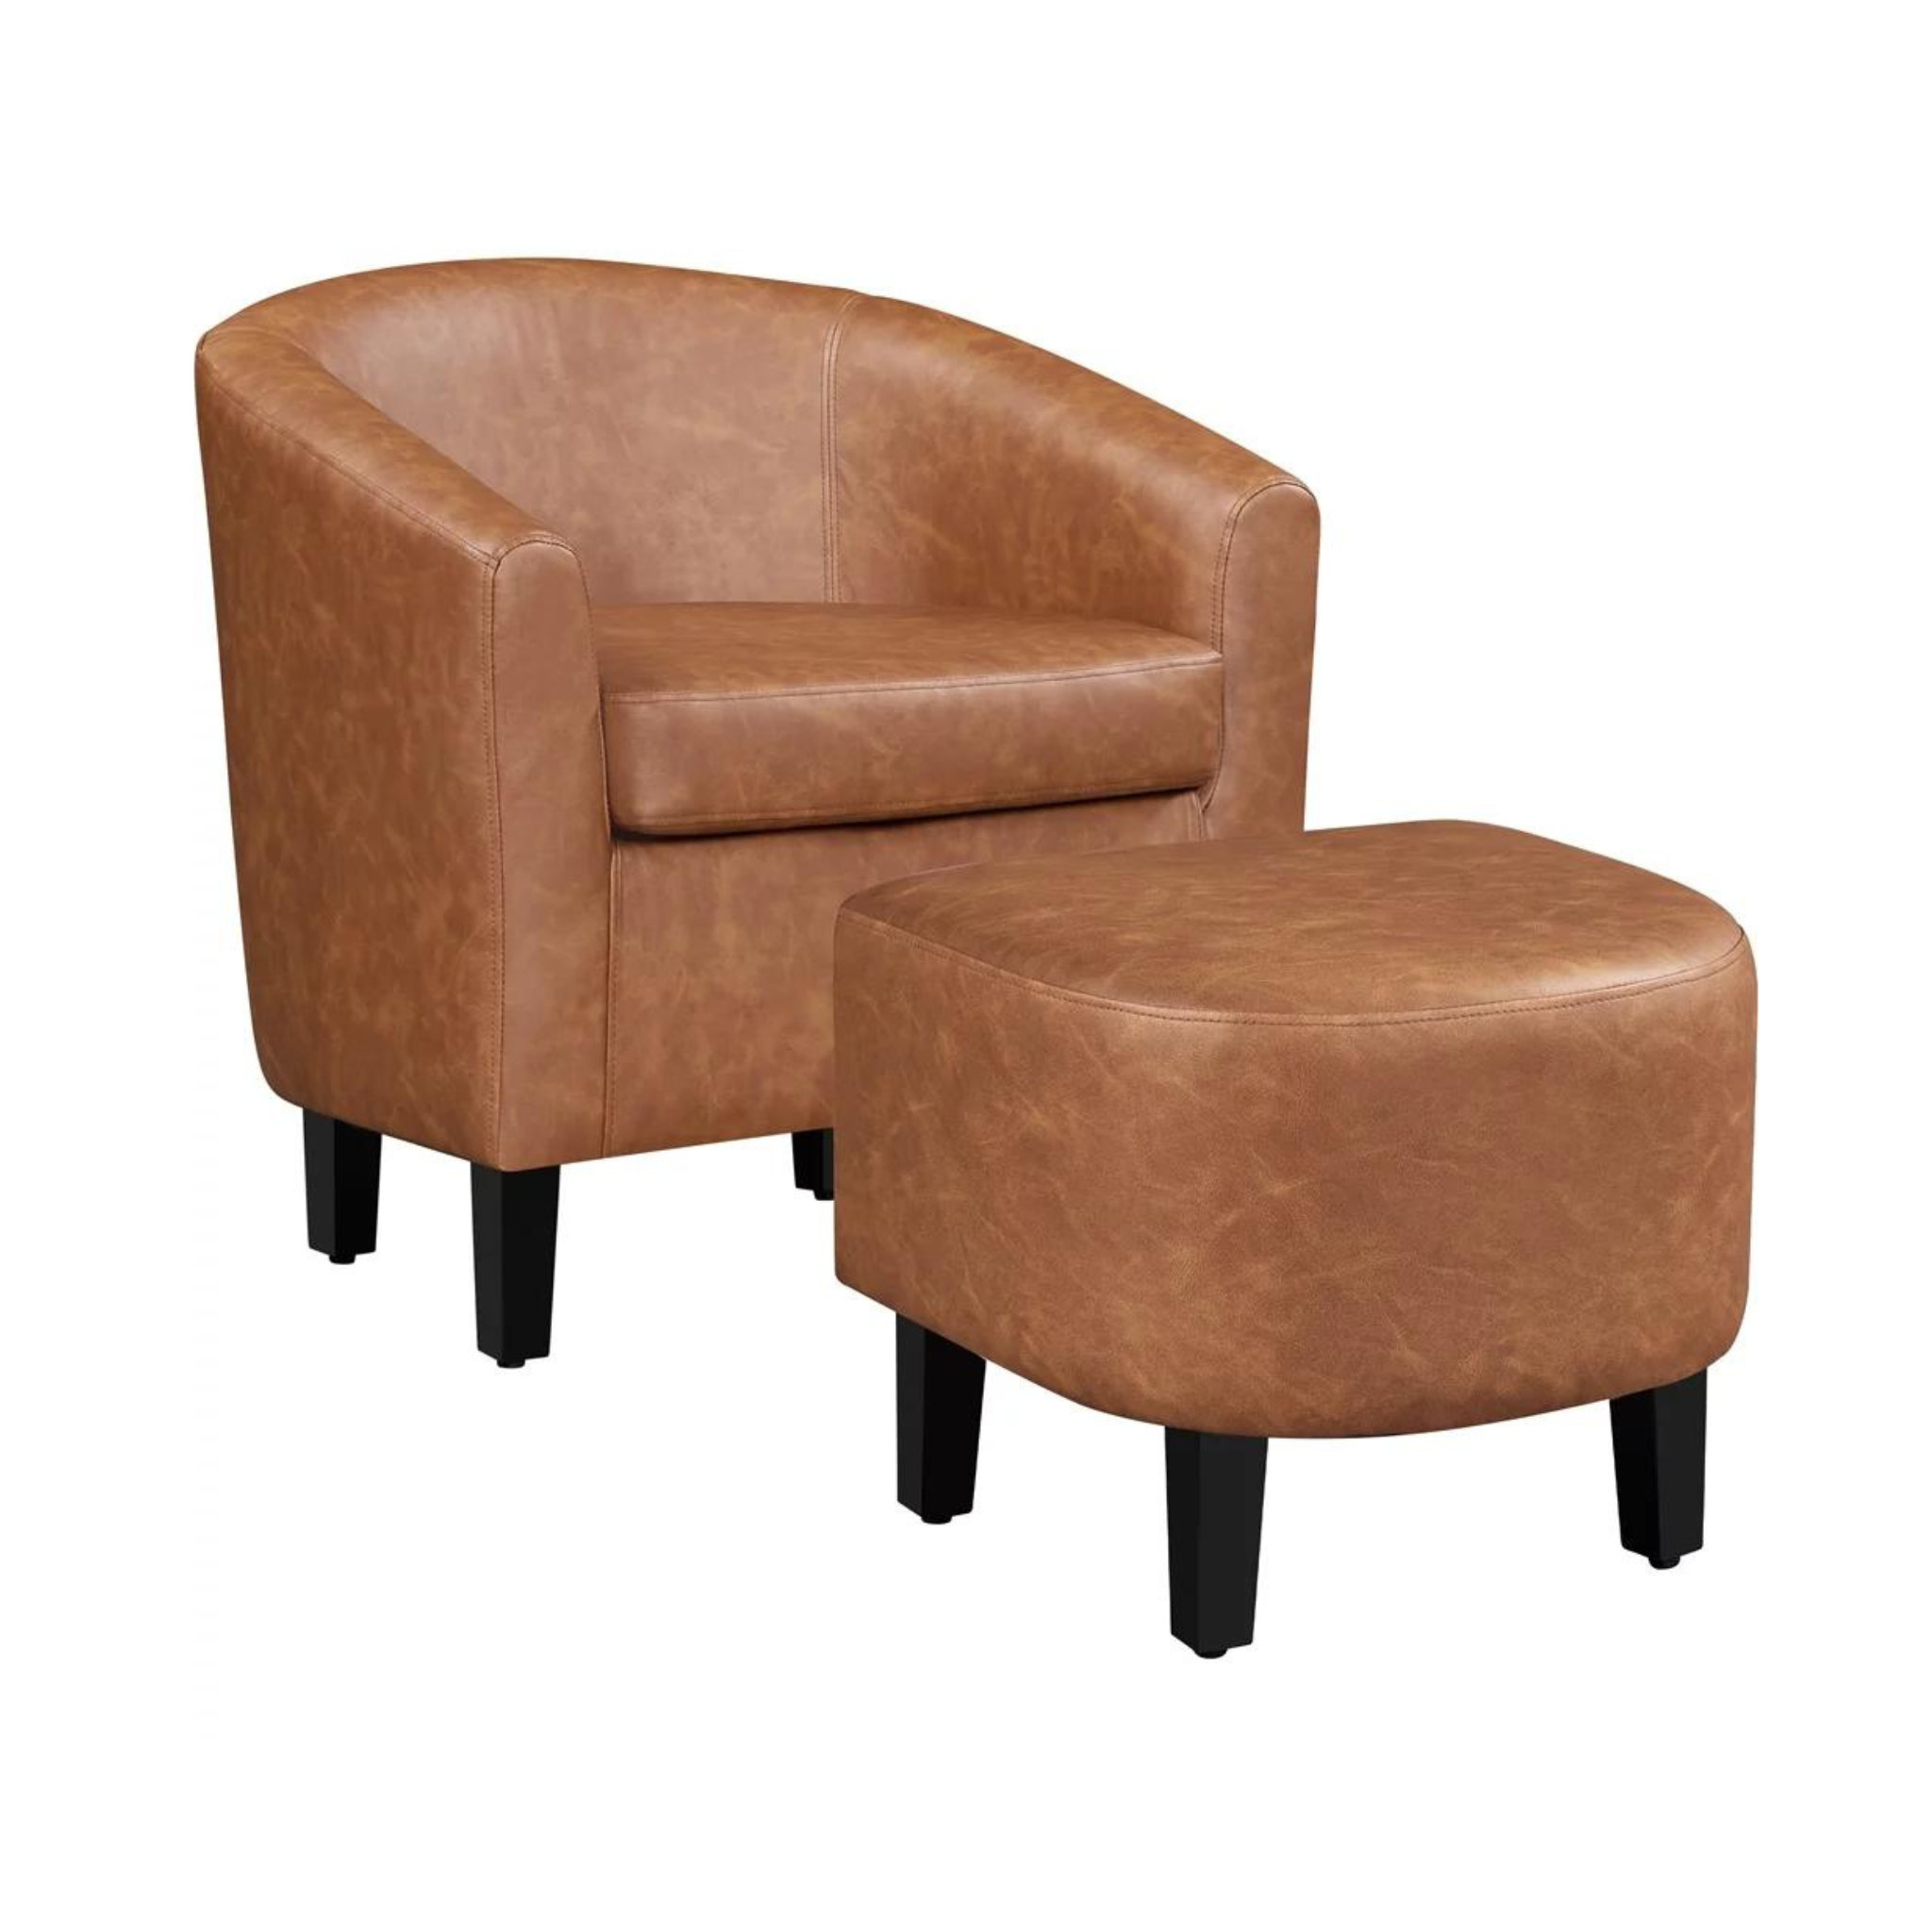 Easyfashion Barrel Accent Faux Leather Chair with Ottoman Set